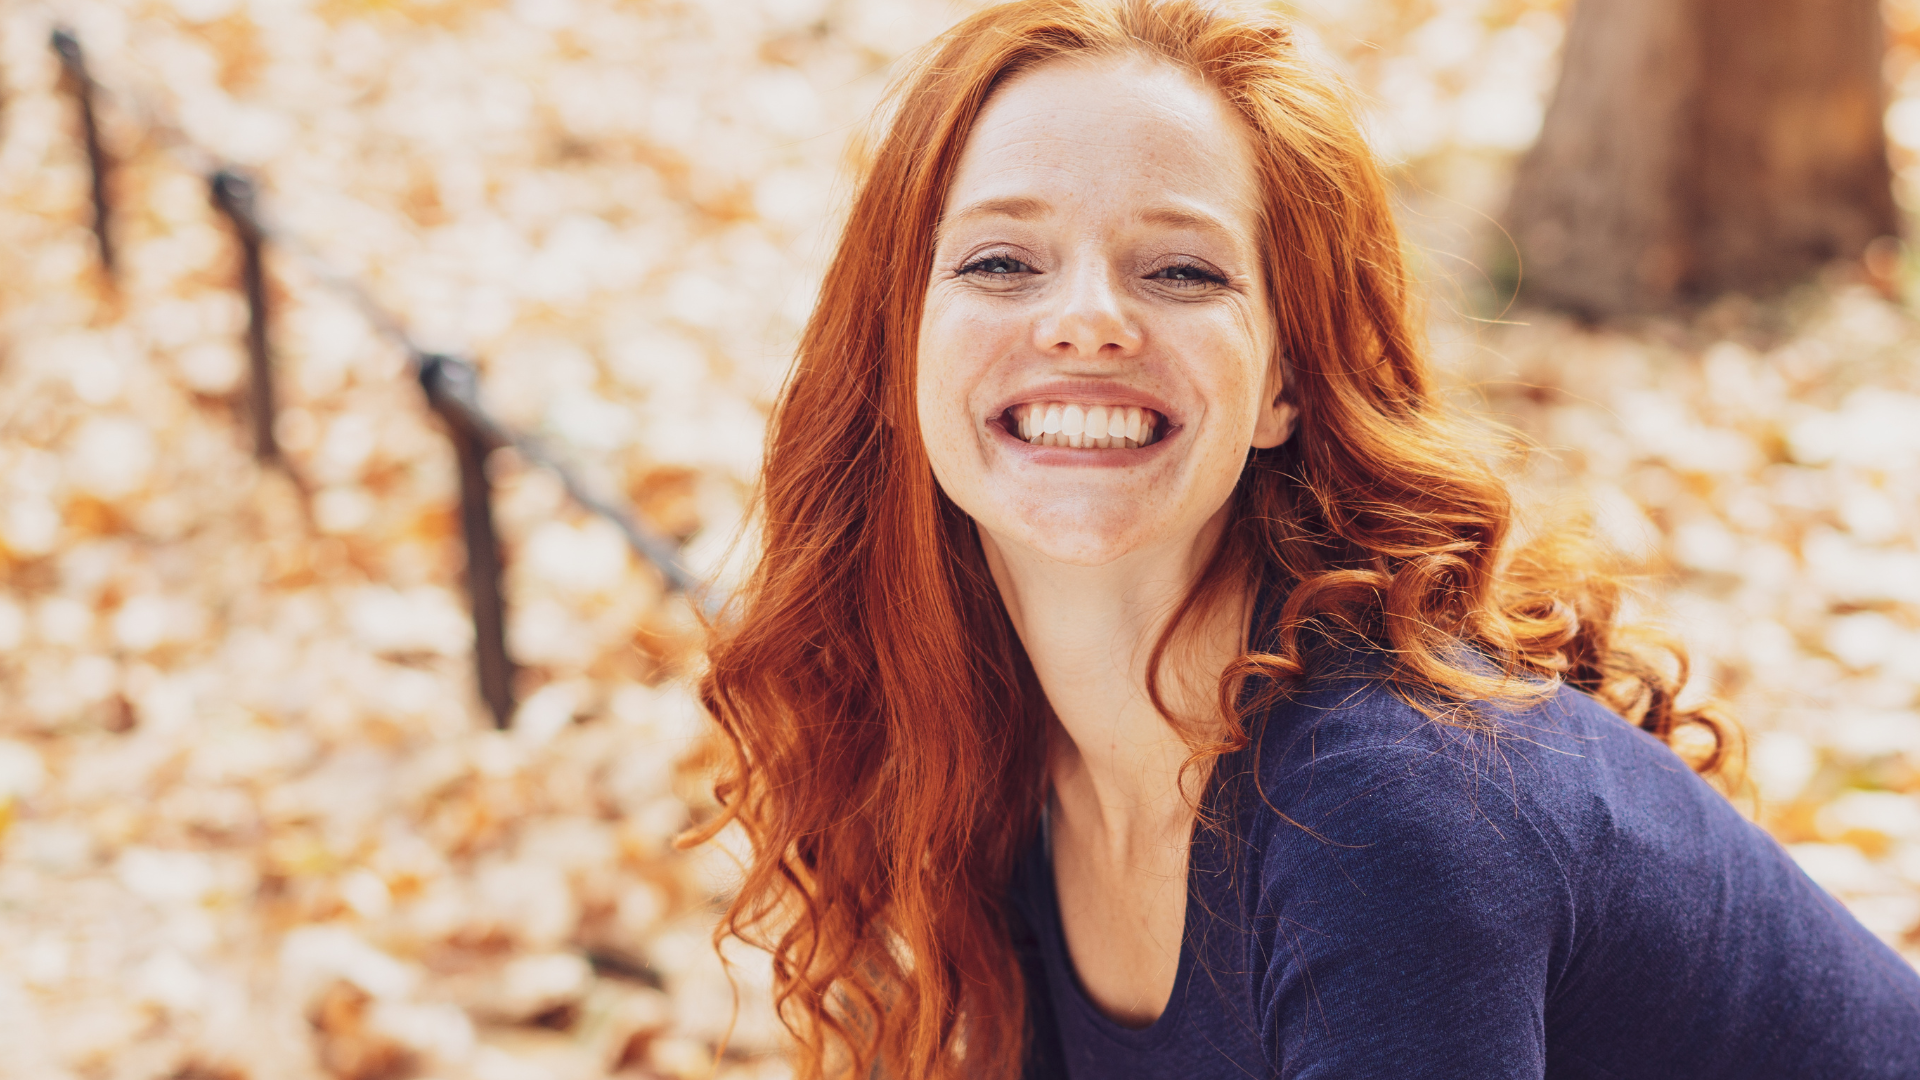 6 Products to Enhance Your Natural Red Hair This Redhead Season